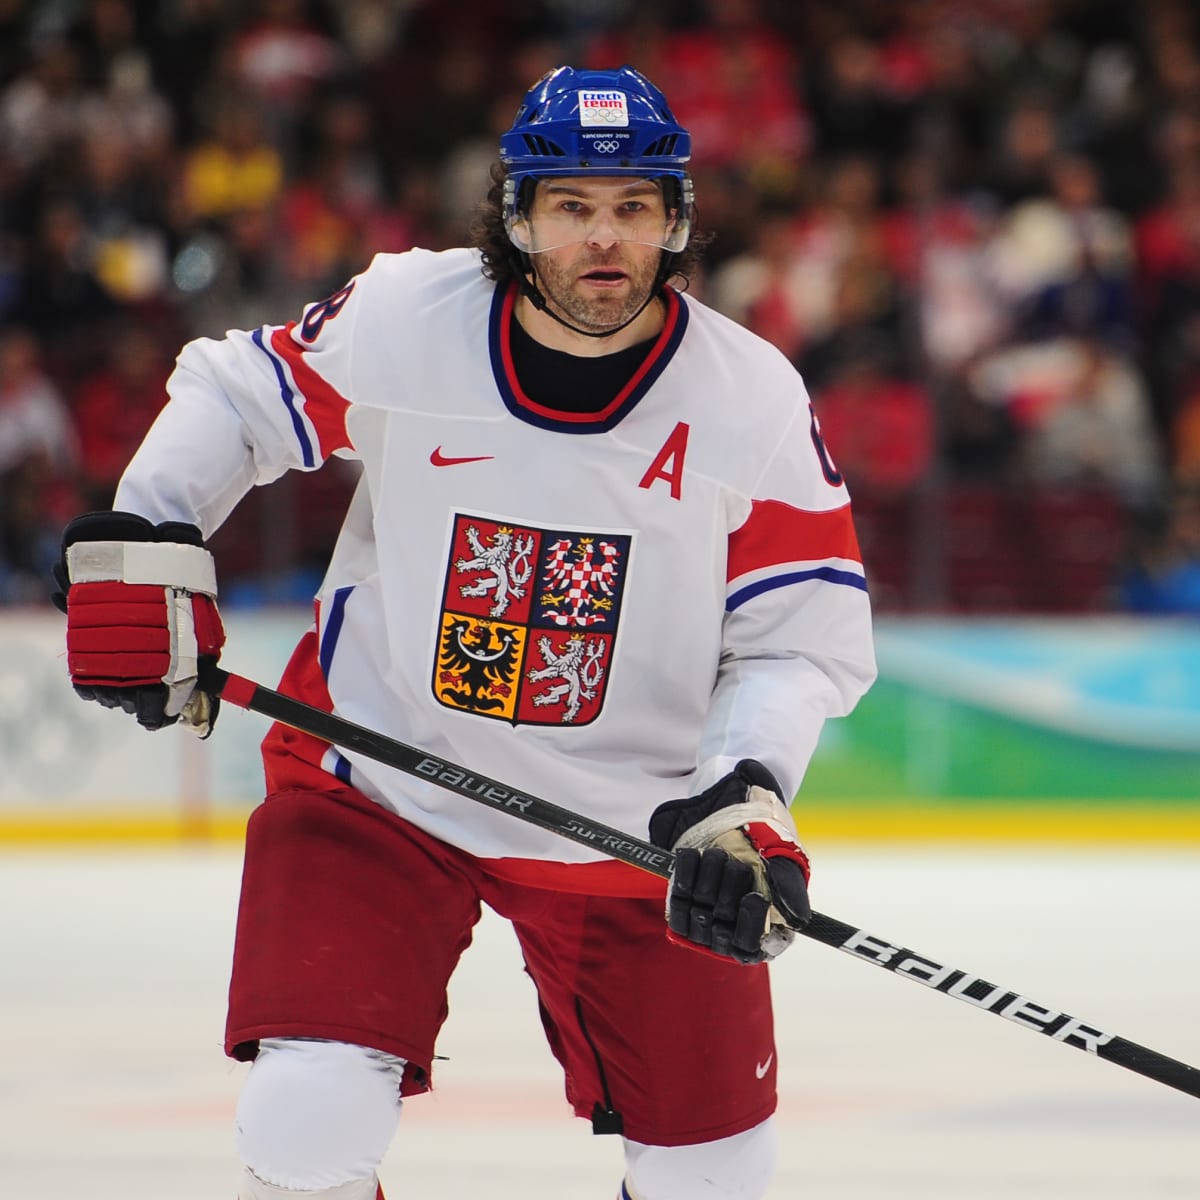 Jagr to donate proceeds from Kladno game to Ukrainian families in